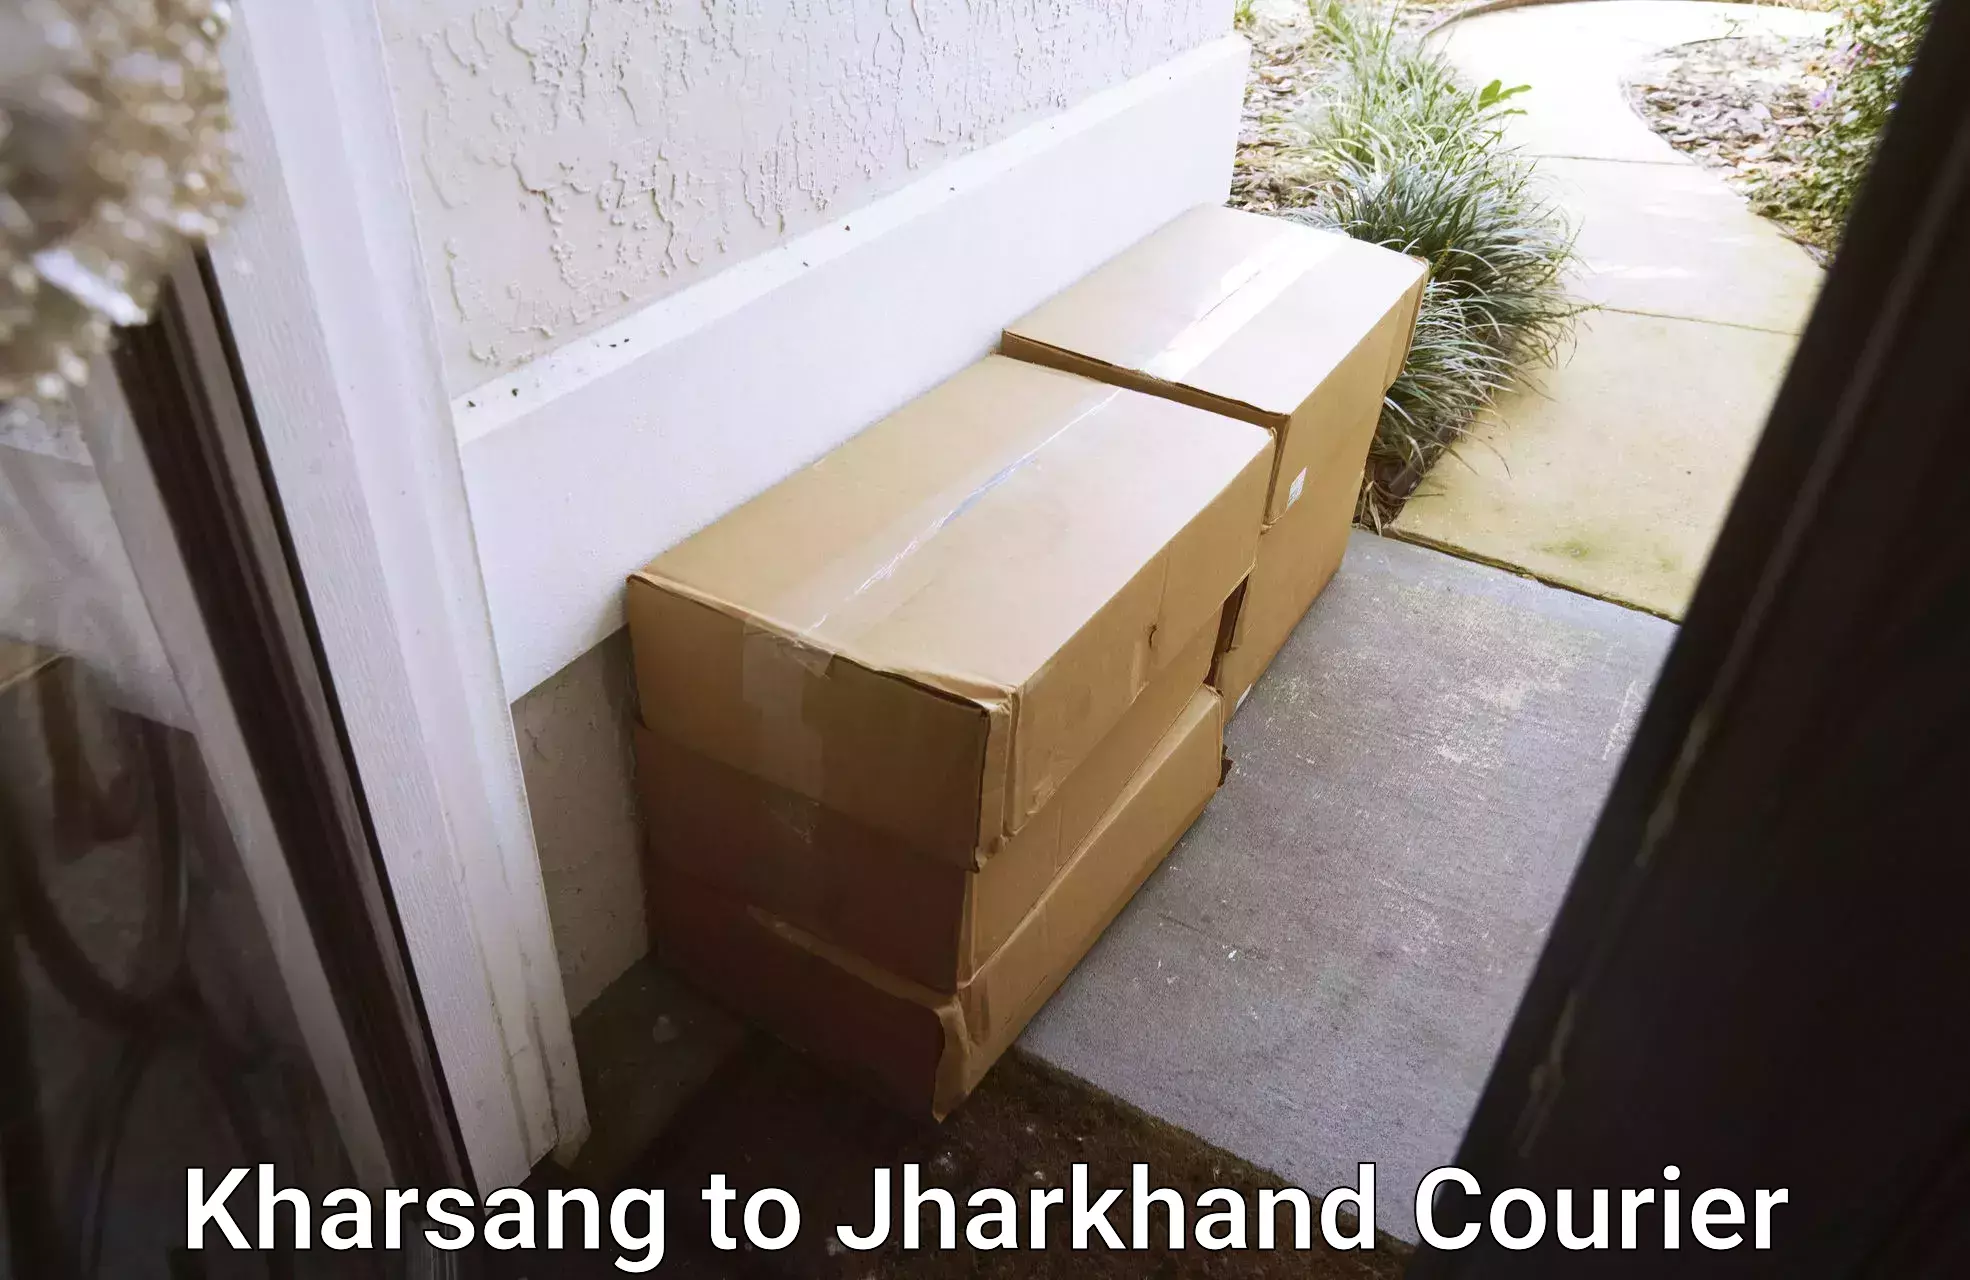 Quality courier services Kharsang to Jharkhand